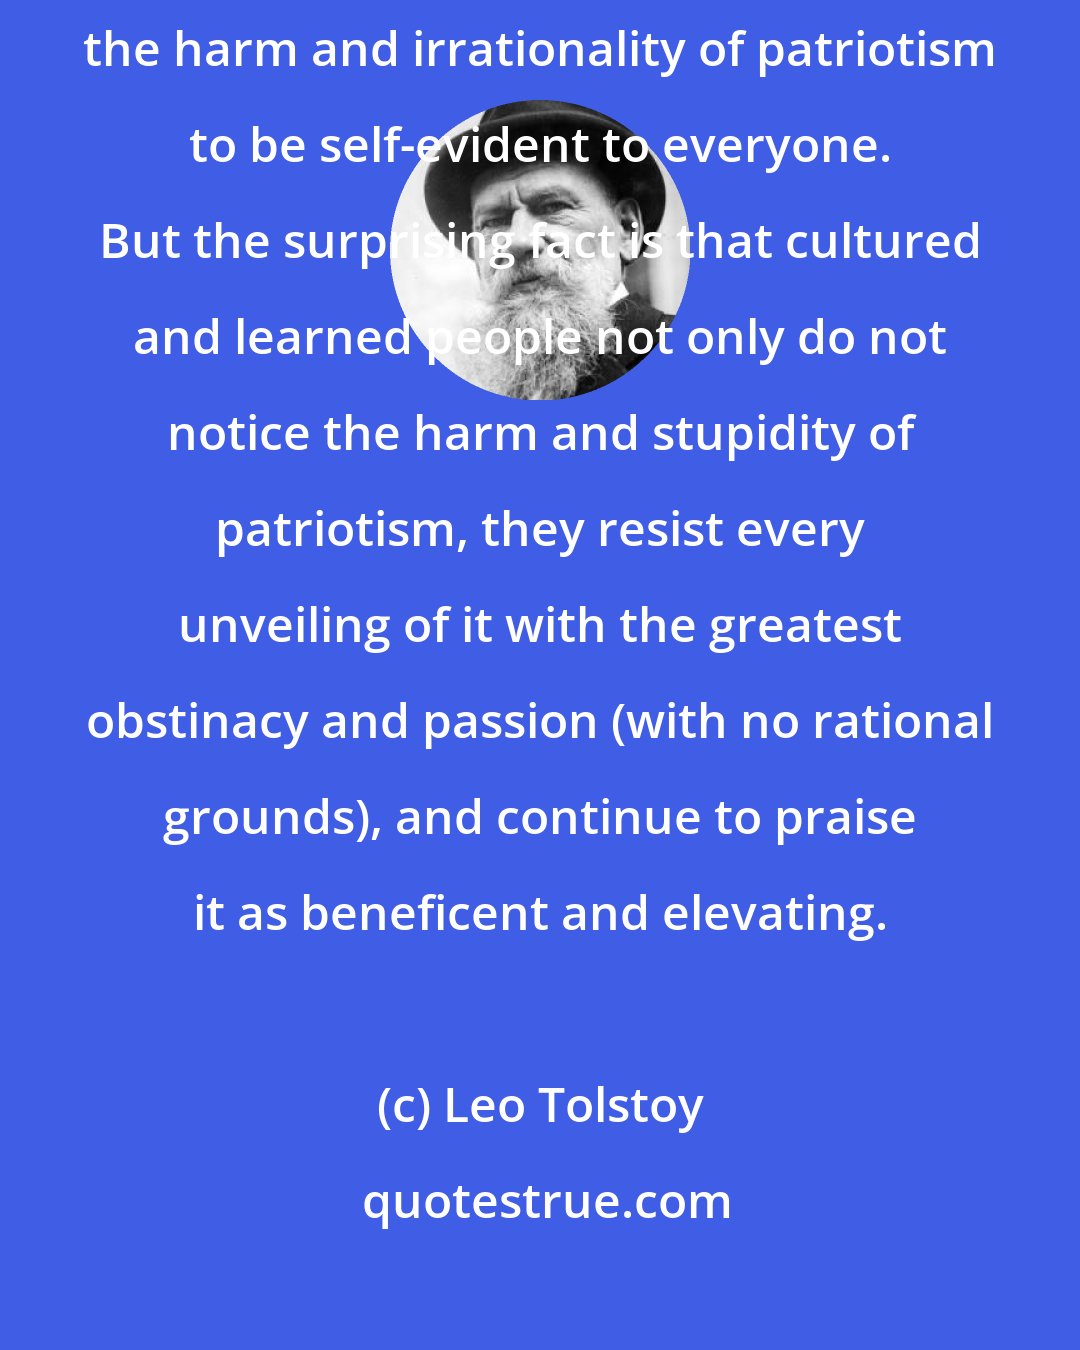 Leo Tolstoy: Seas of blood have been shed for the sake of patriotism. One would expect the harm and irrationality of patriotism to be self-evident to everyone. But the surprising fact is that cultured and learned people not only do not notice the harm and stupidity of patriotism, they resist every unveiling of it with the greatest obstinacy and passion (with no rational grounds), and continue to praise it as beneficent and elevating.